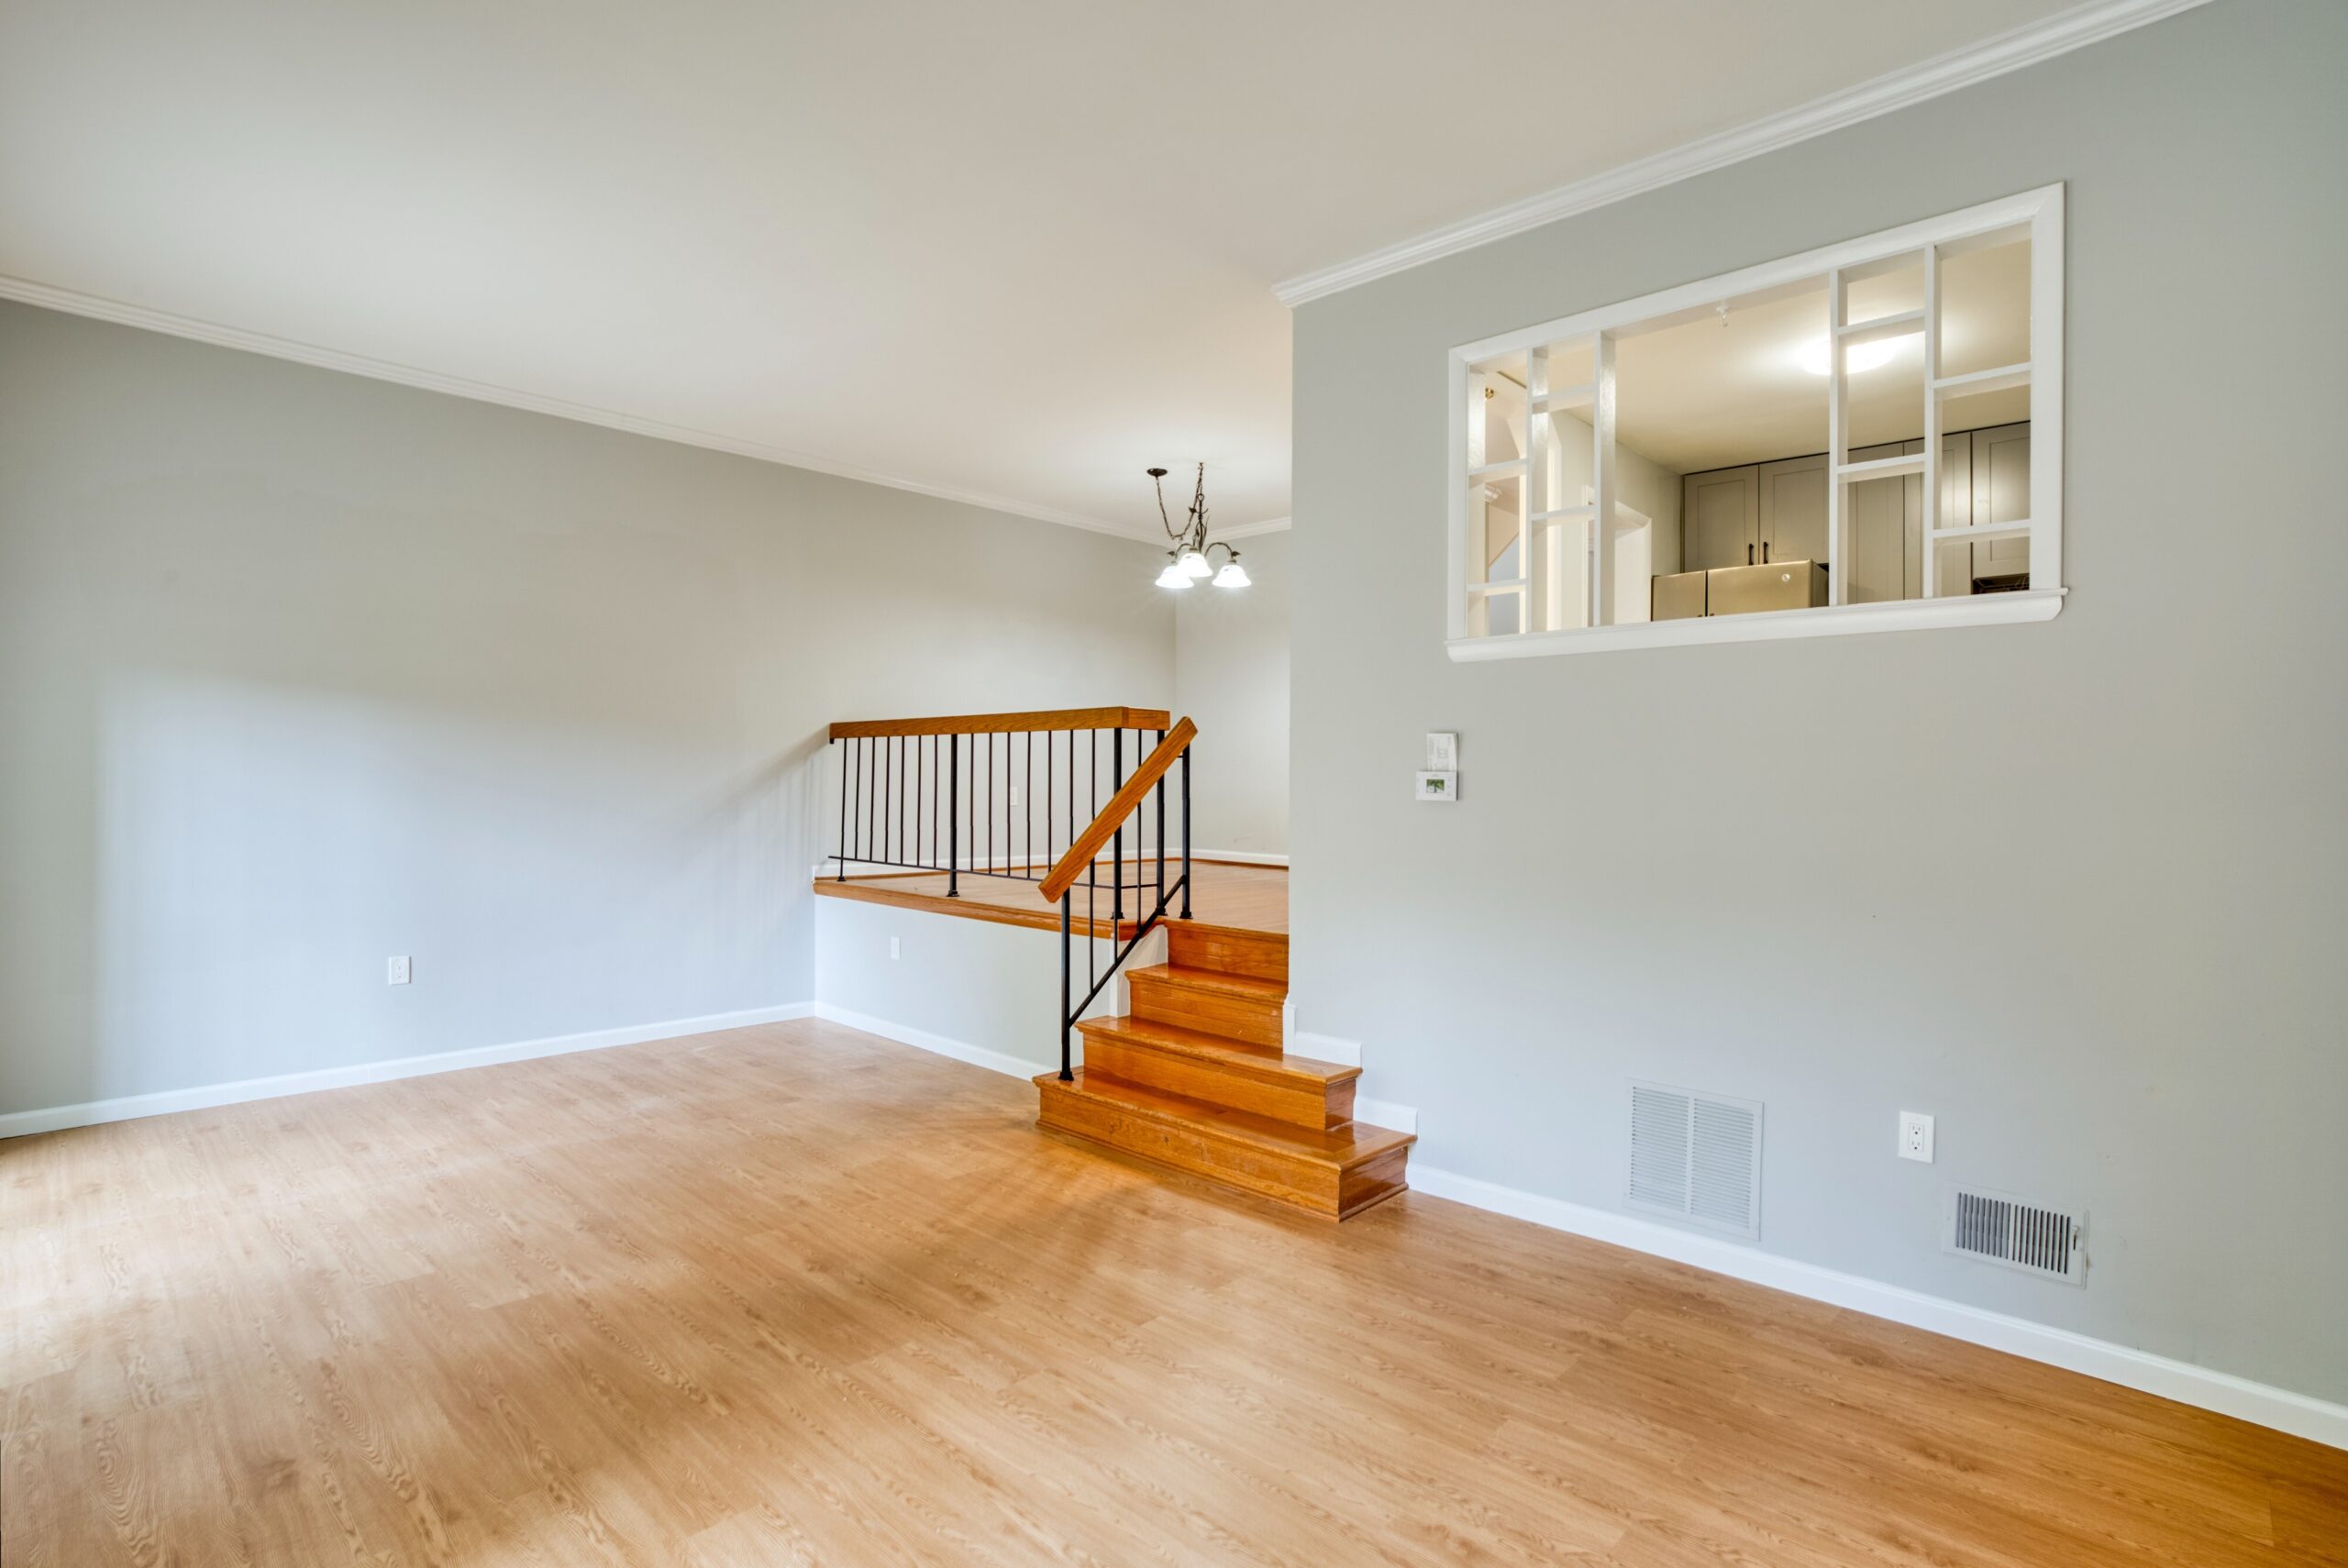 Professional interior photo of 6302 Arwen Court, Fort Washington, MD - showing the living room with 4 stairs up to the dining room and window of the kitchen overlooking the living room